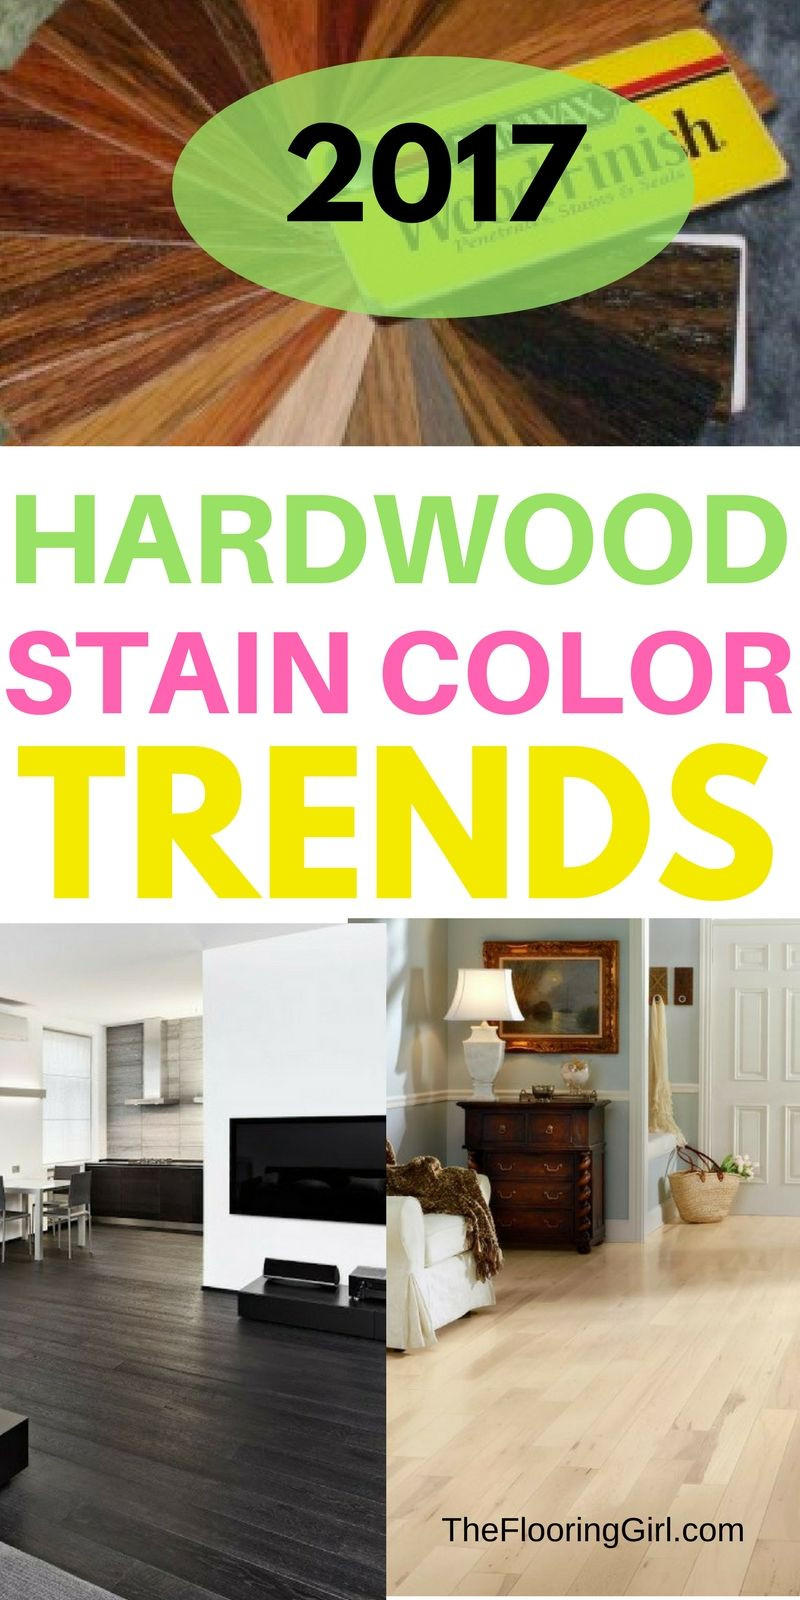 30 Best Hardwood Flooring Styles and Colors 2024 free download hardwood flooring styles and colors of hardwood flooring stain color trends 2018 more from the flooring inside hardwood flooring stain color trends for 2017 hardwood colors that are in style